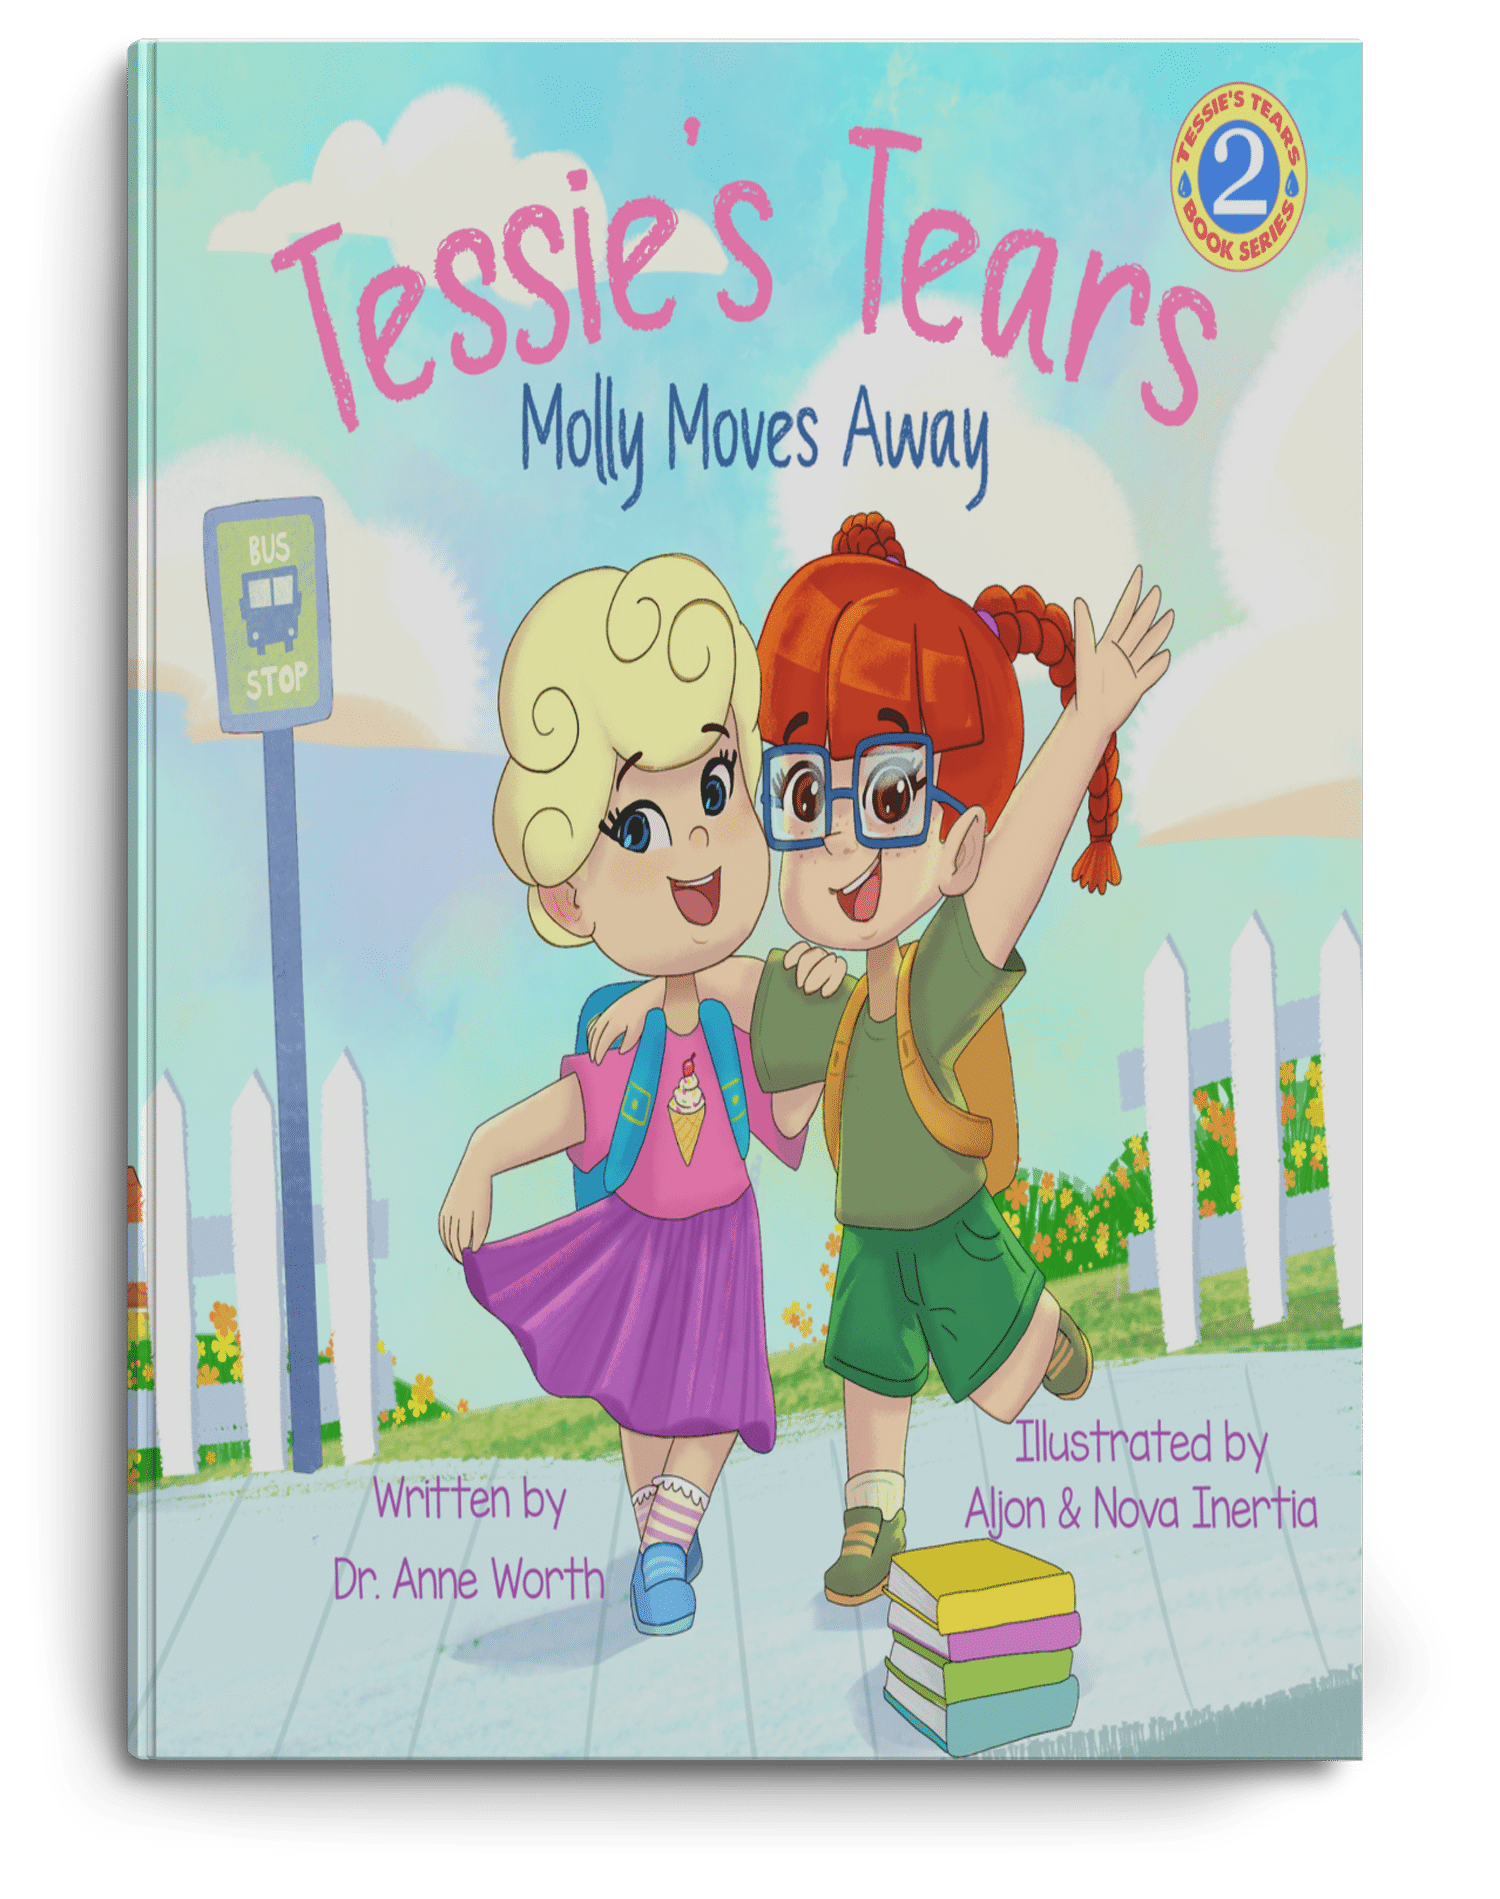 Tessie’s Tears: Molly Moves Away